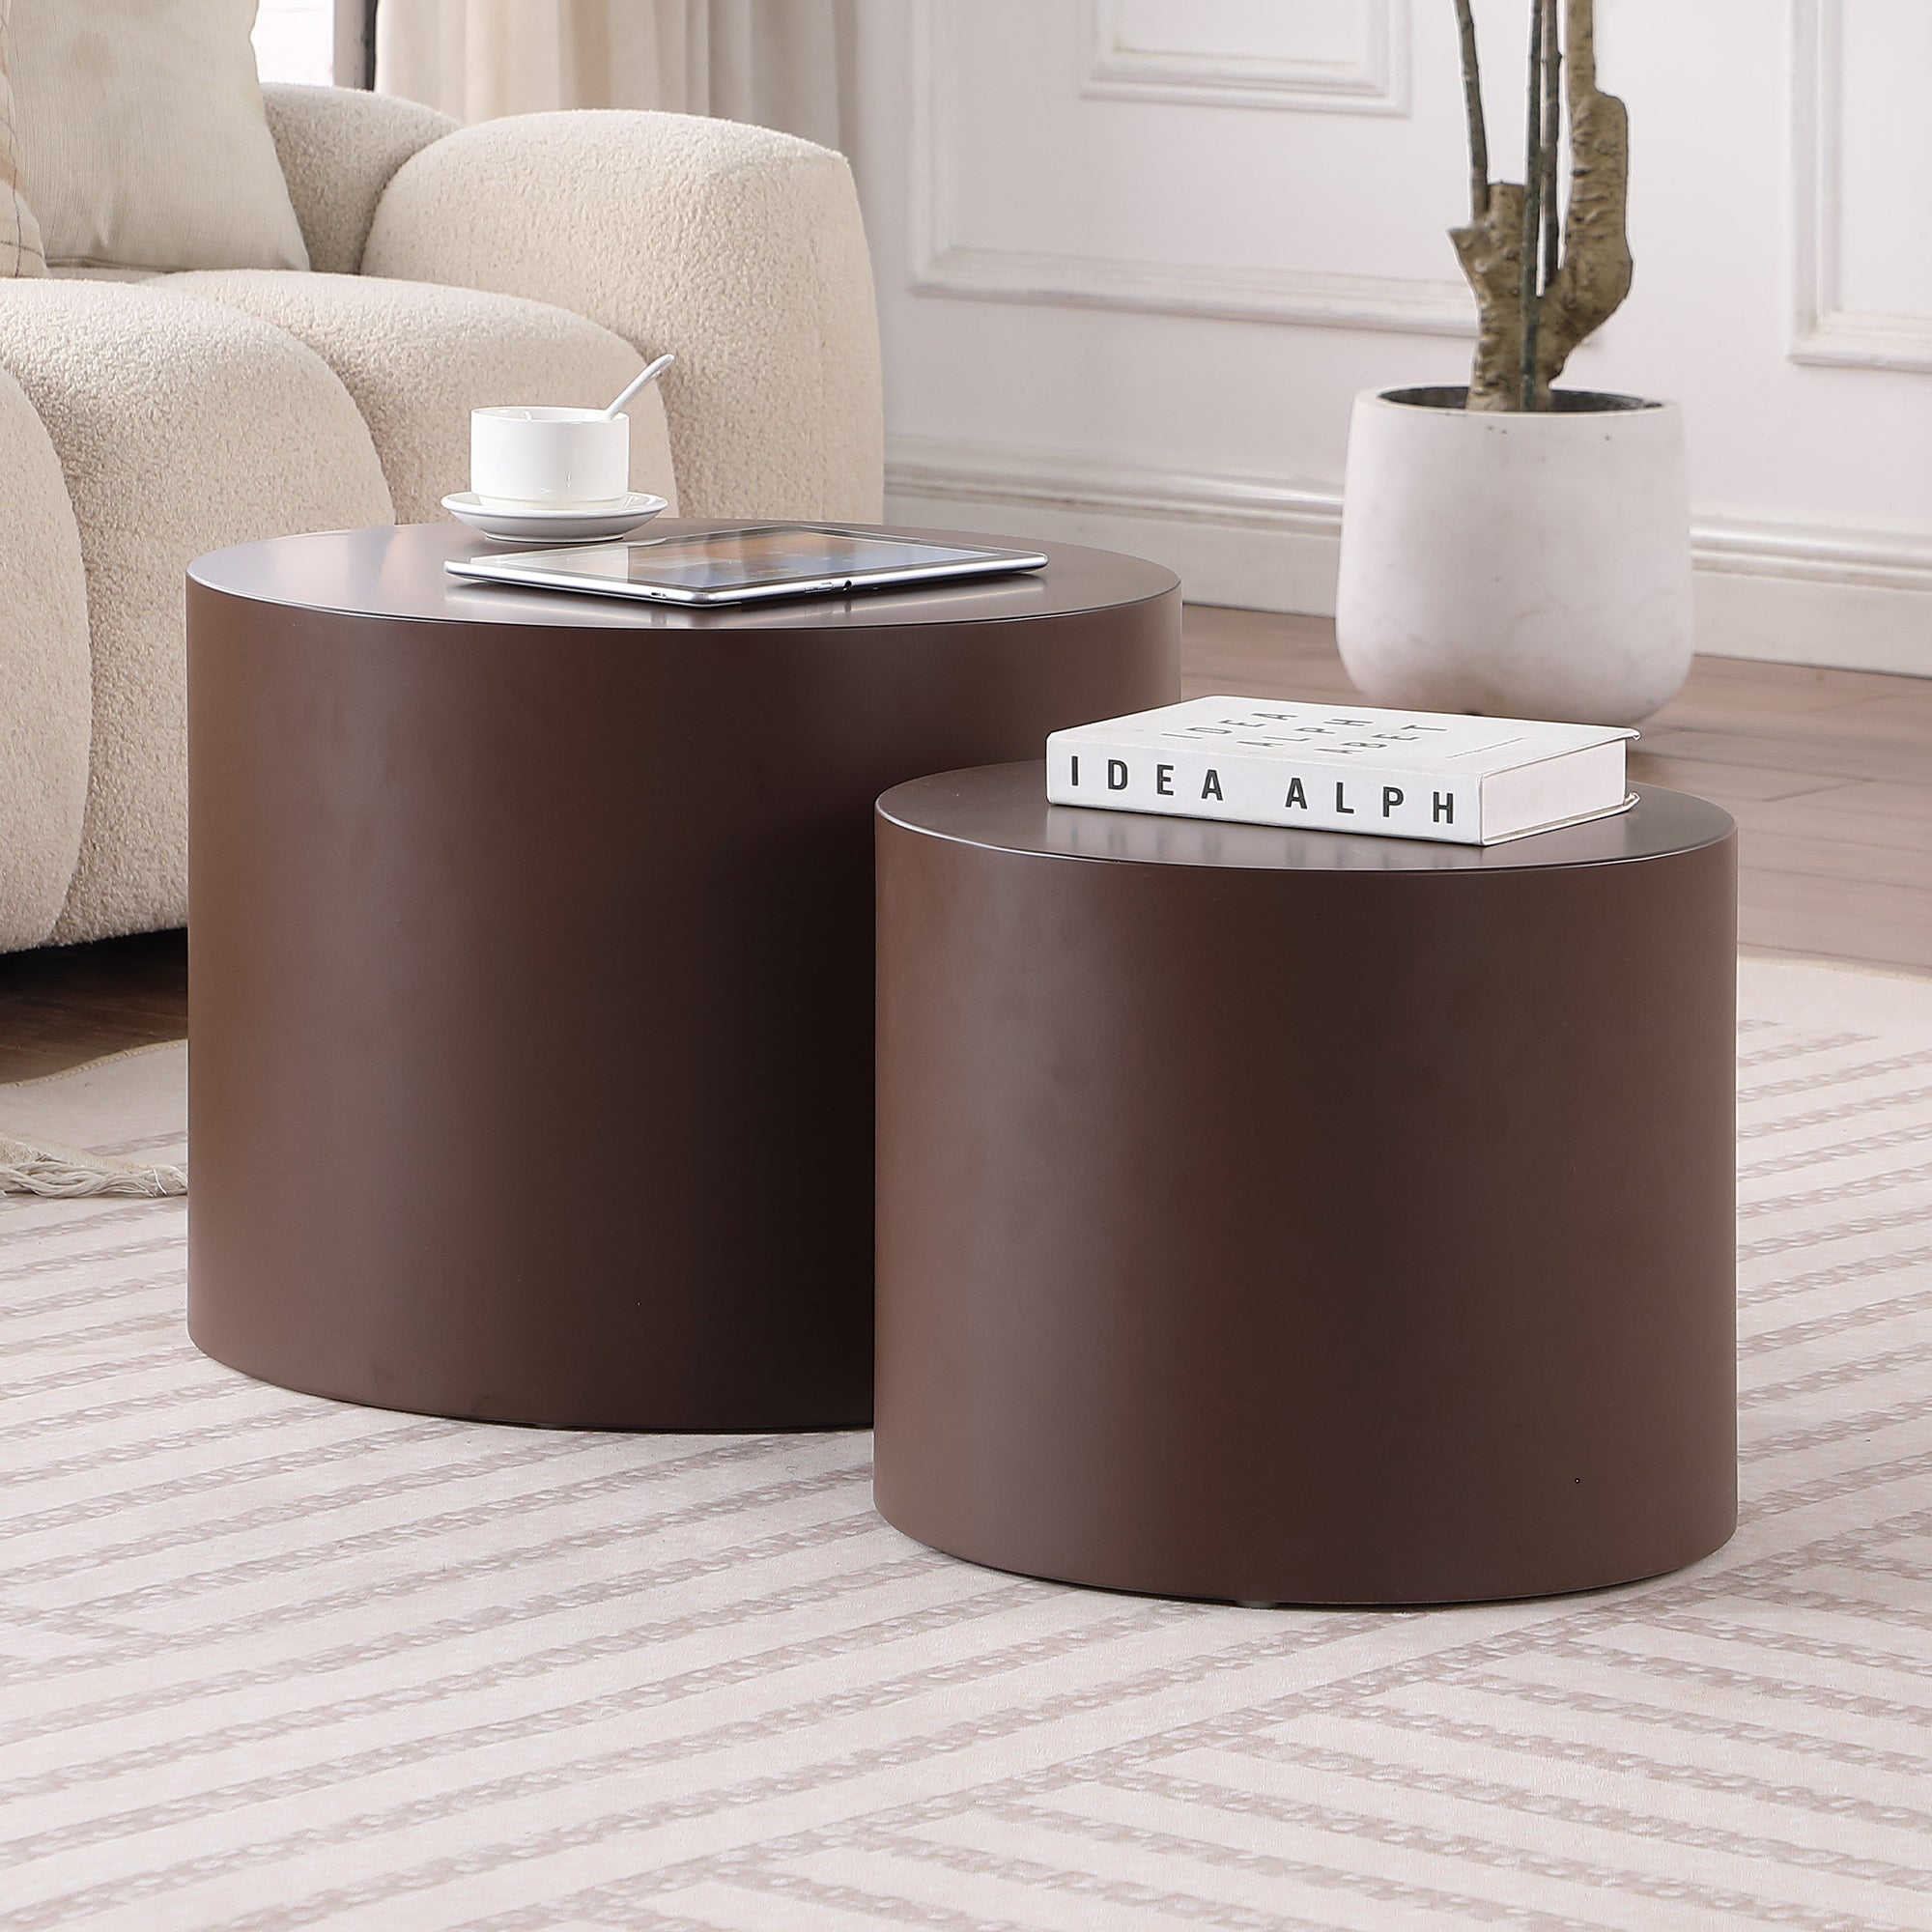 MDF Nesting table Set of 2 Rround Side Table Brown dark brown-mdf